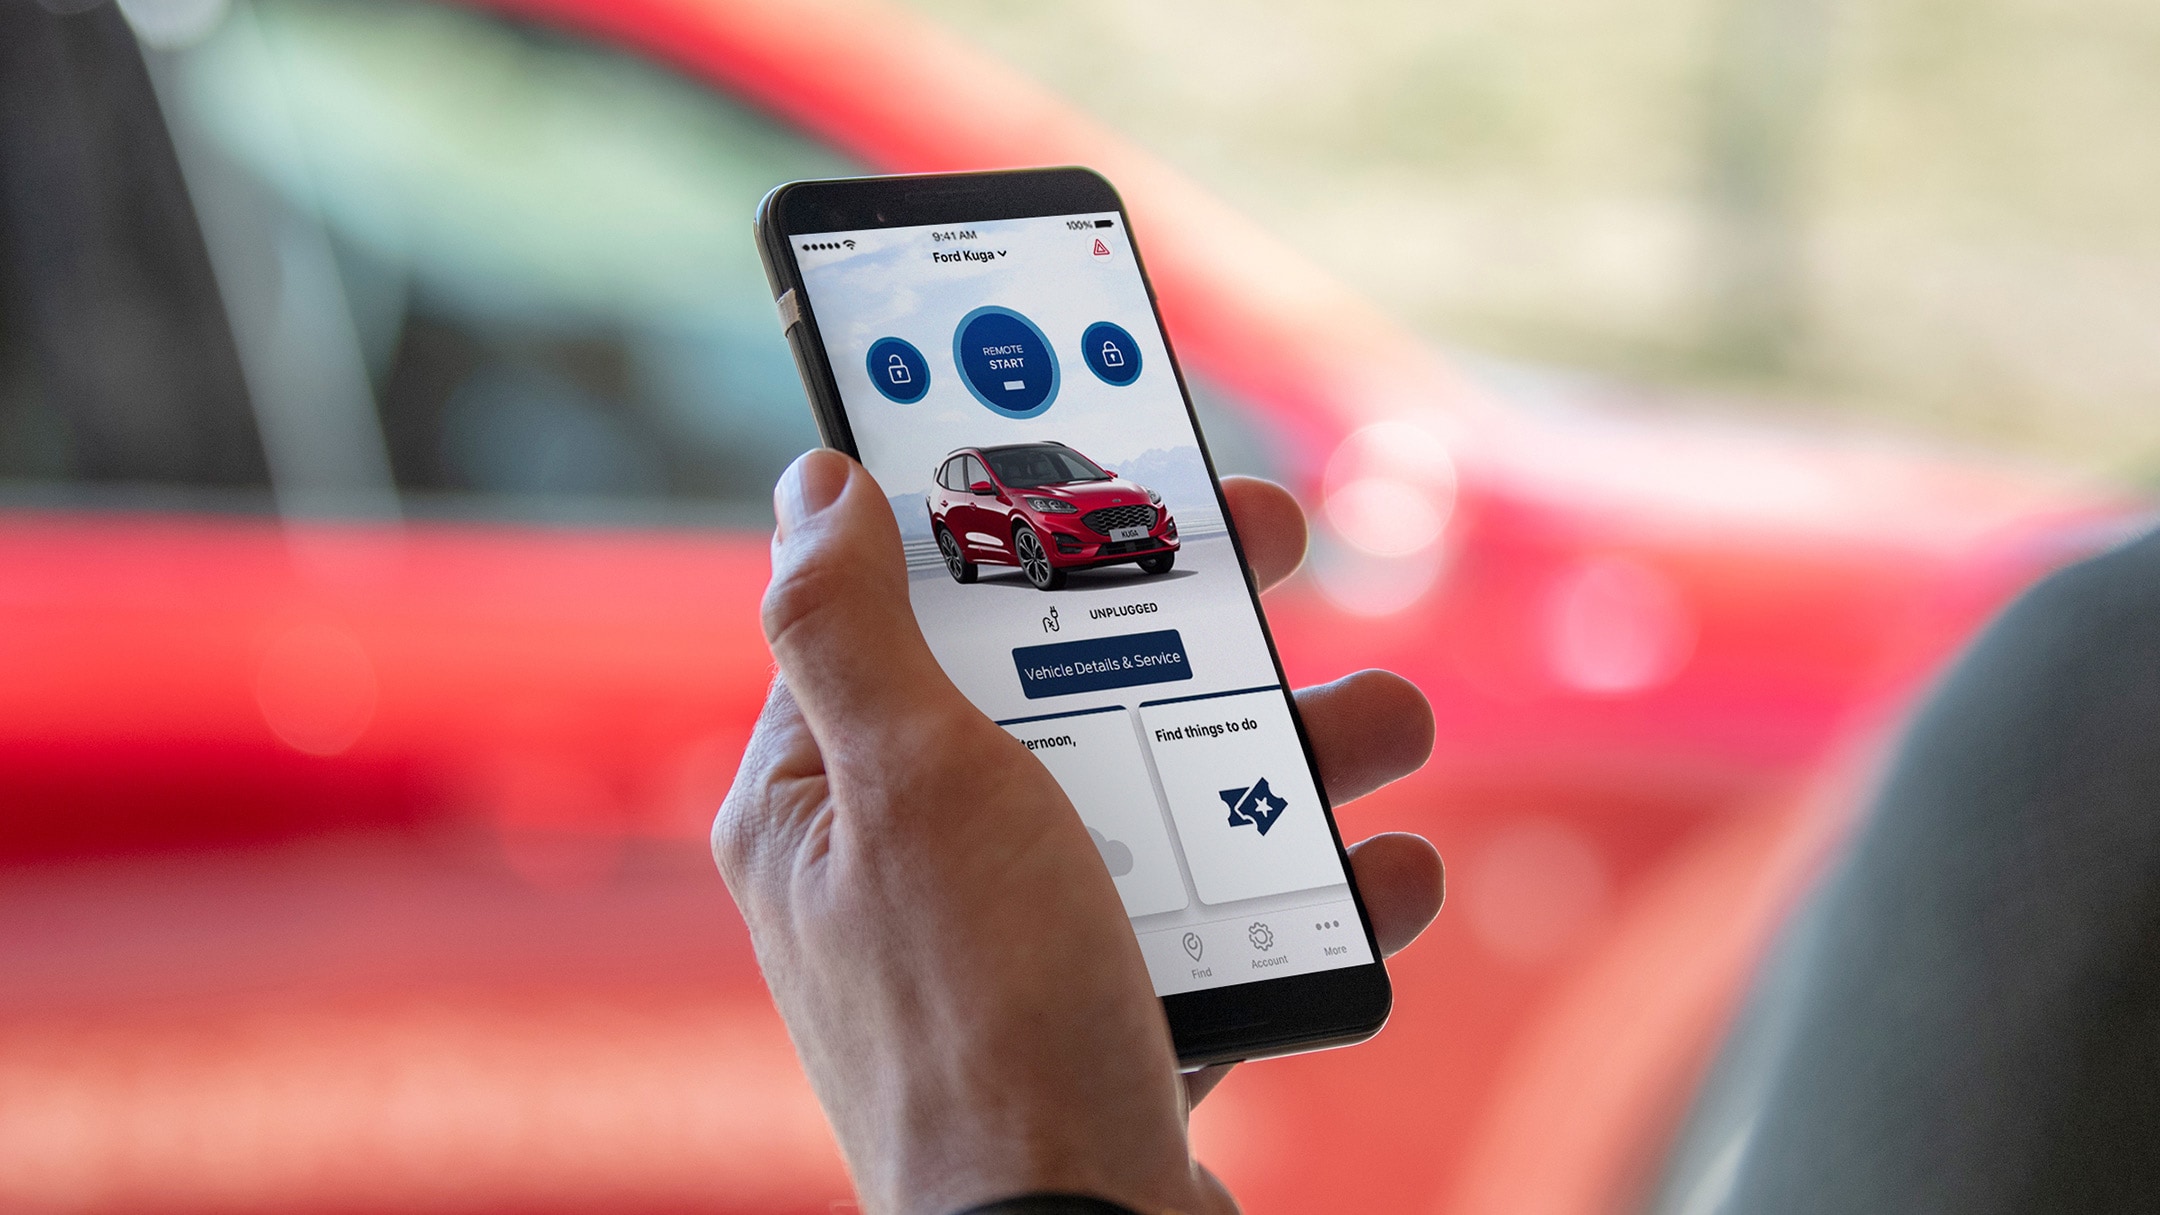 FordPass App being shown on phone